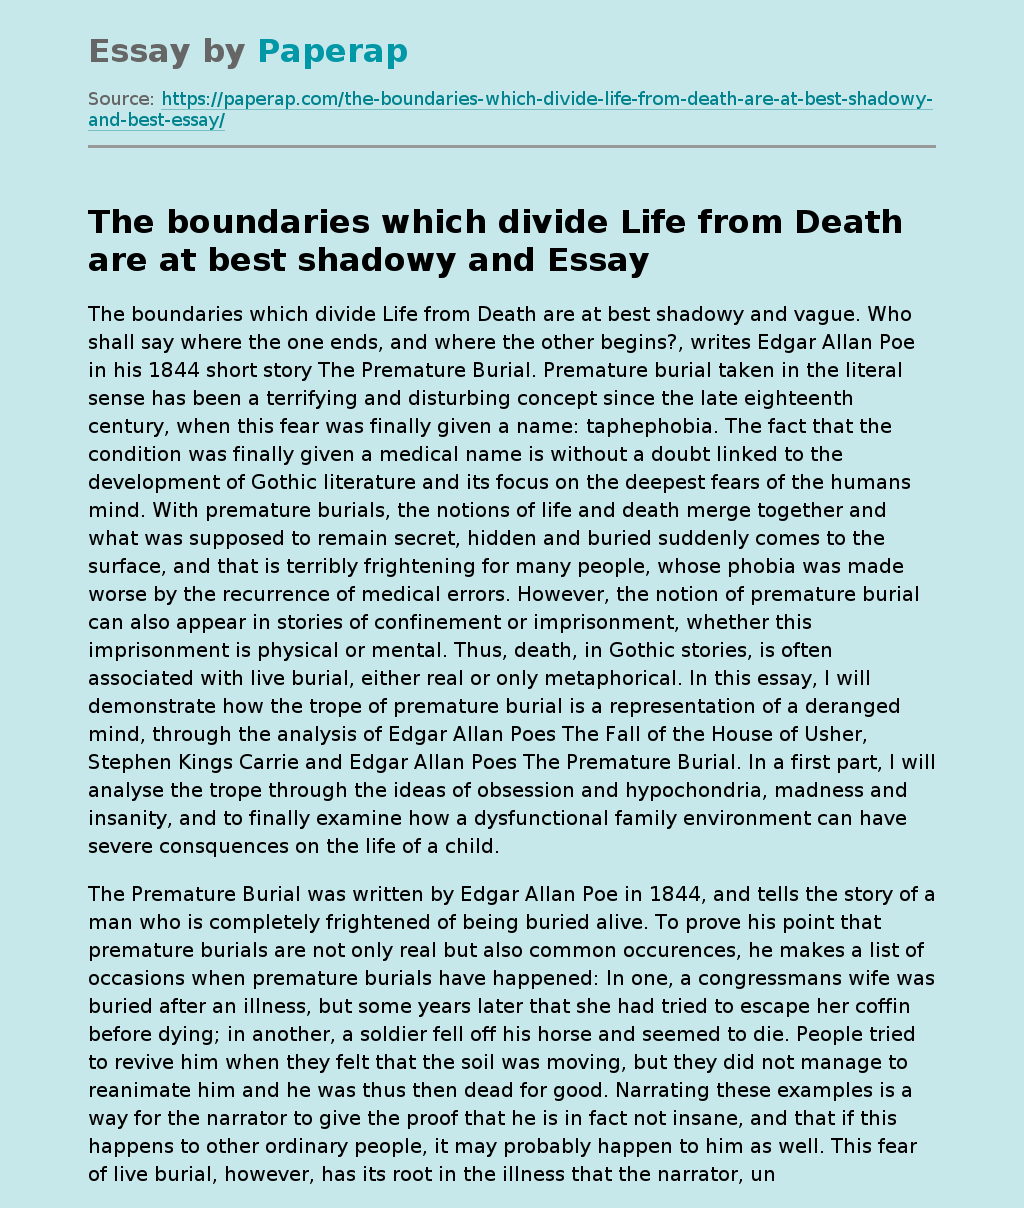 The boundaries which divide Life from Death are at best shadowy and